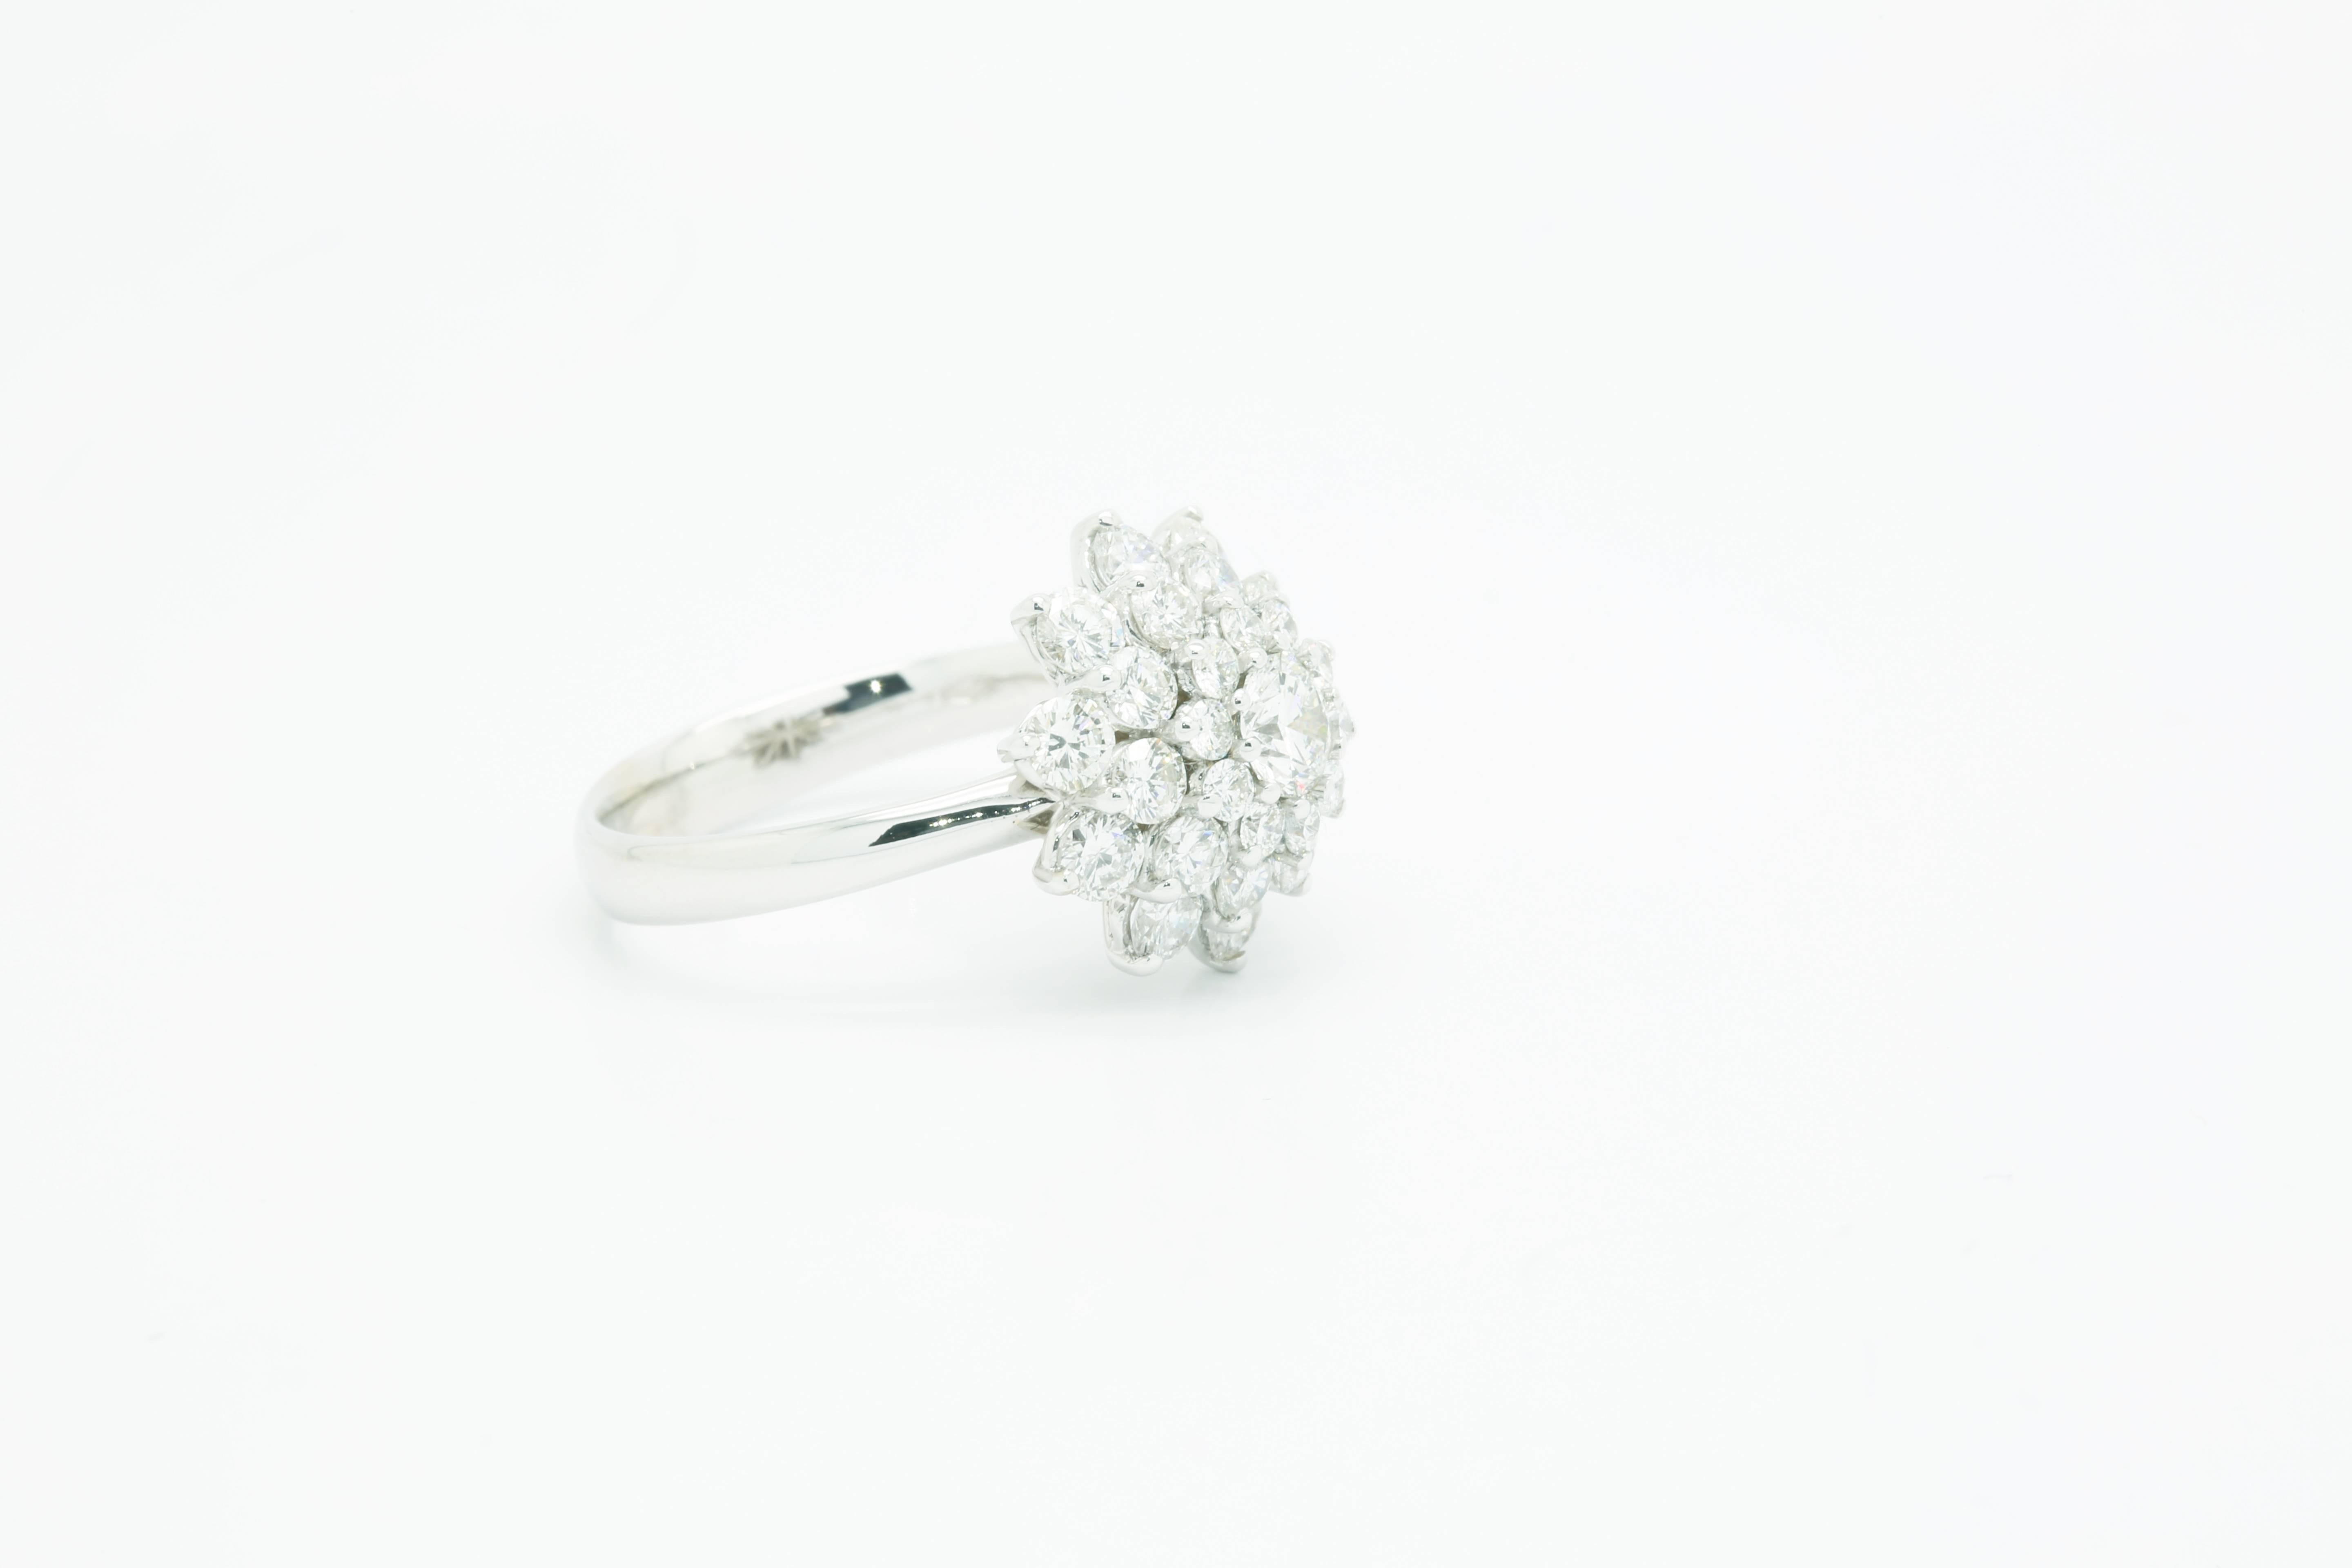 FERRUCCI 2.13 carat white diamonds Flower Cluster in an hand made 18k white gold ring
This ring is a size 7, complimentary sizing upon order before shipping.

